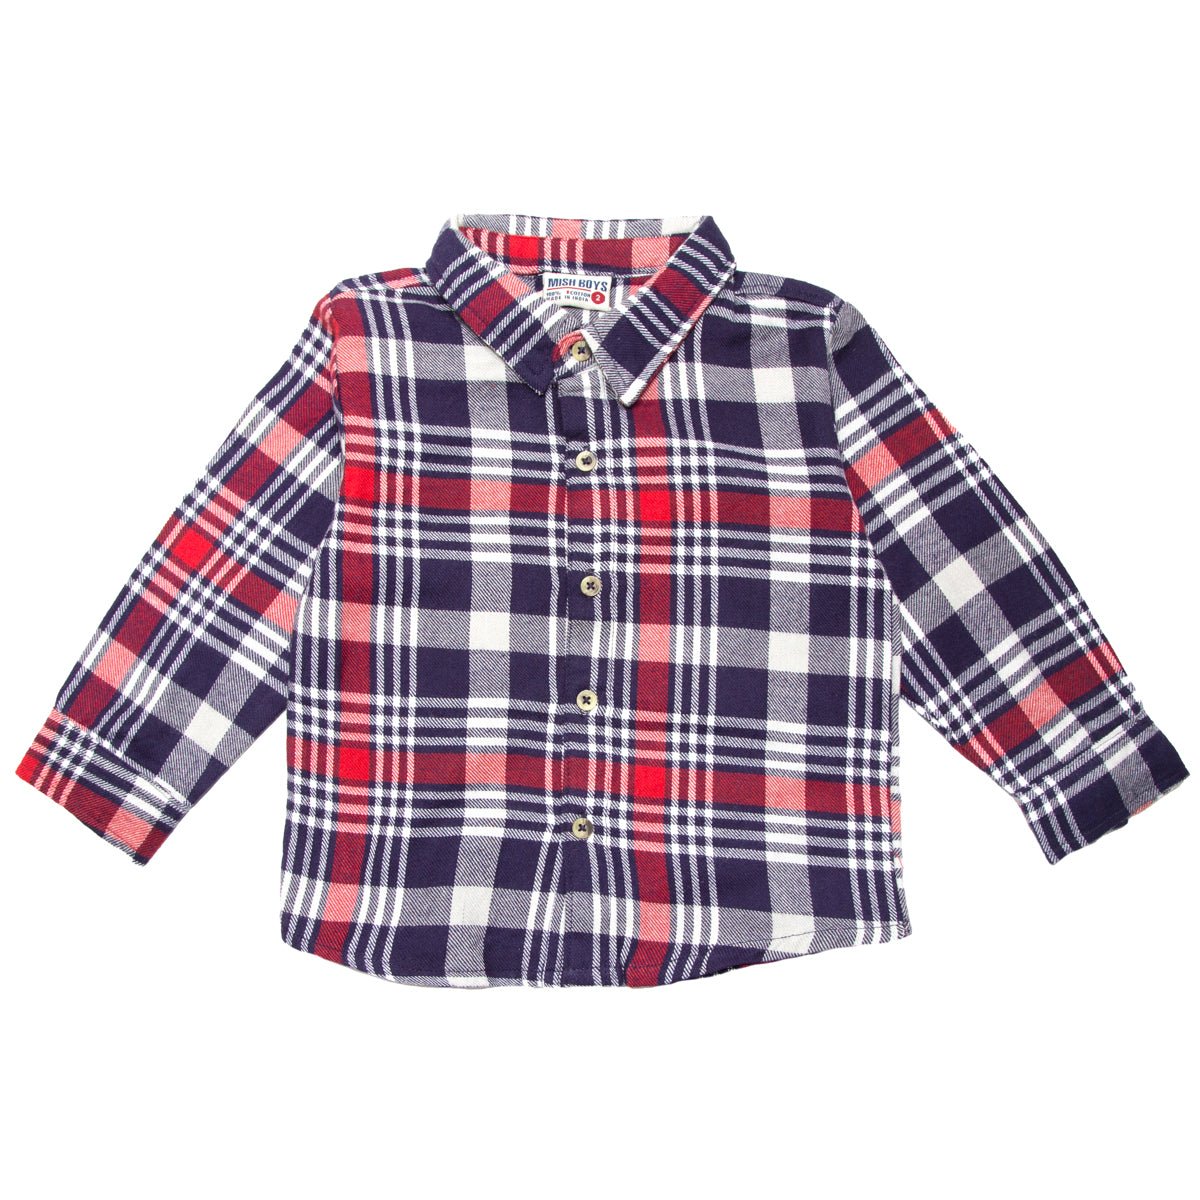 NEW YORK VINTAGE FLANNEL BUTTON TOP - BUTTON DOWNS